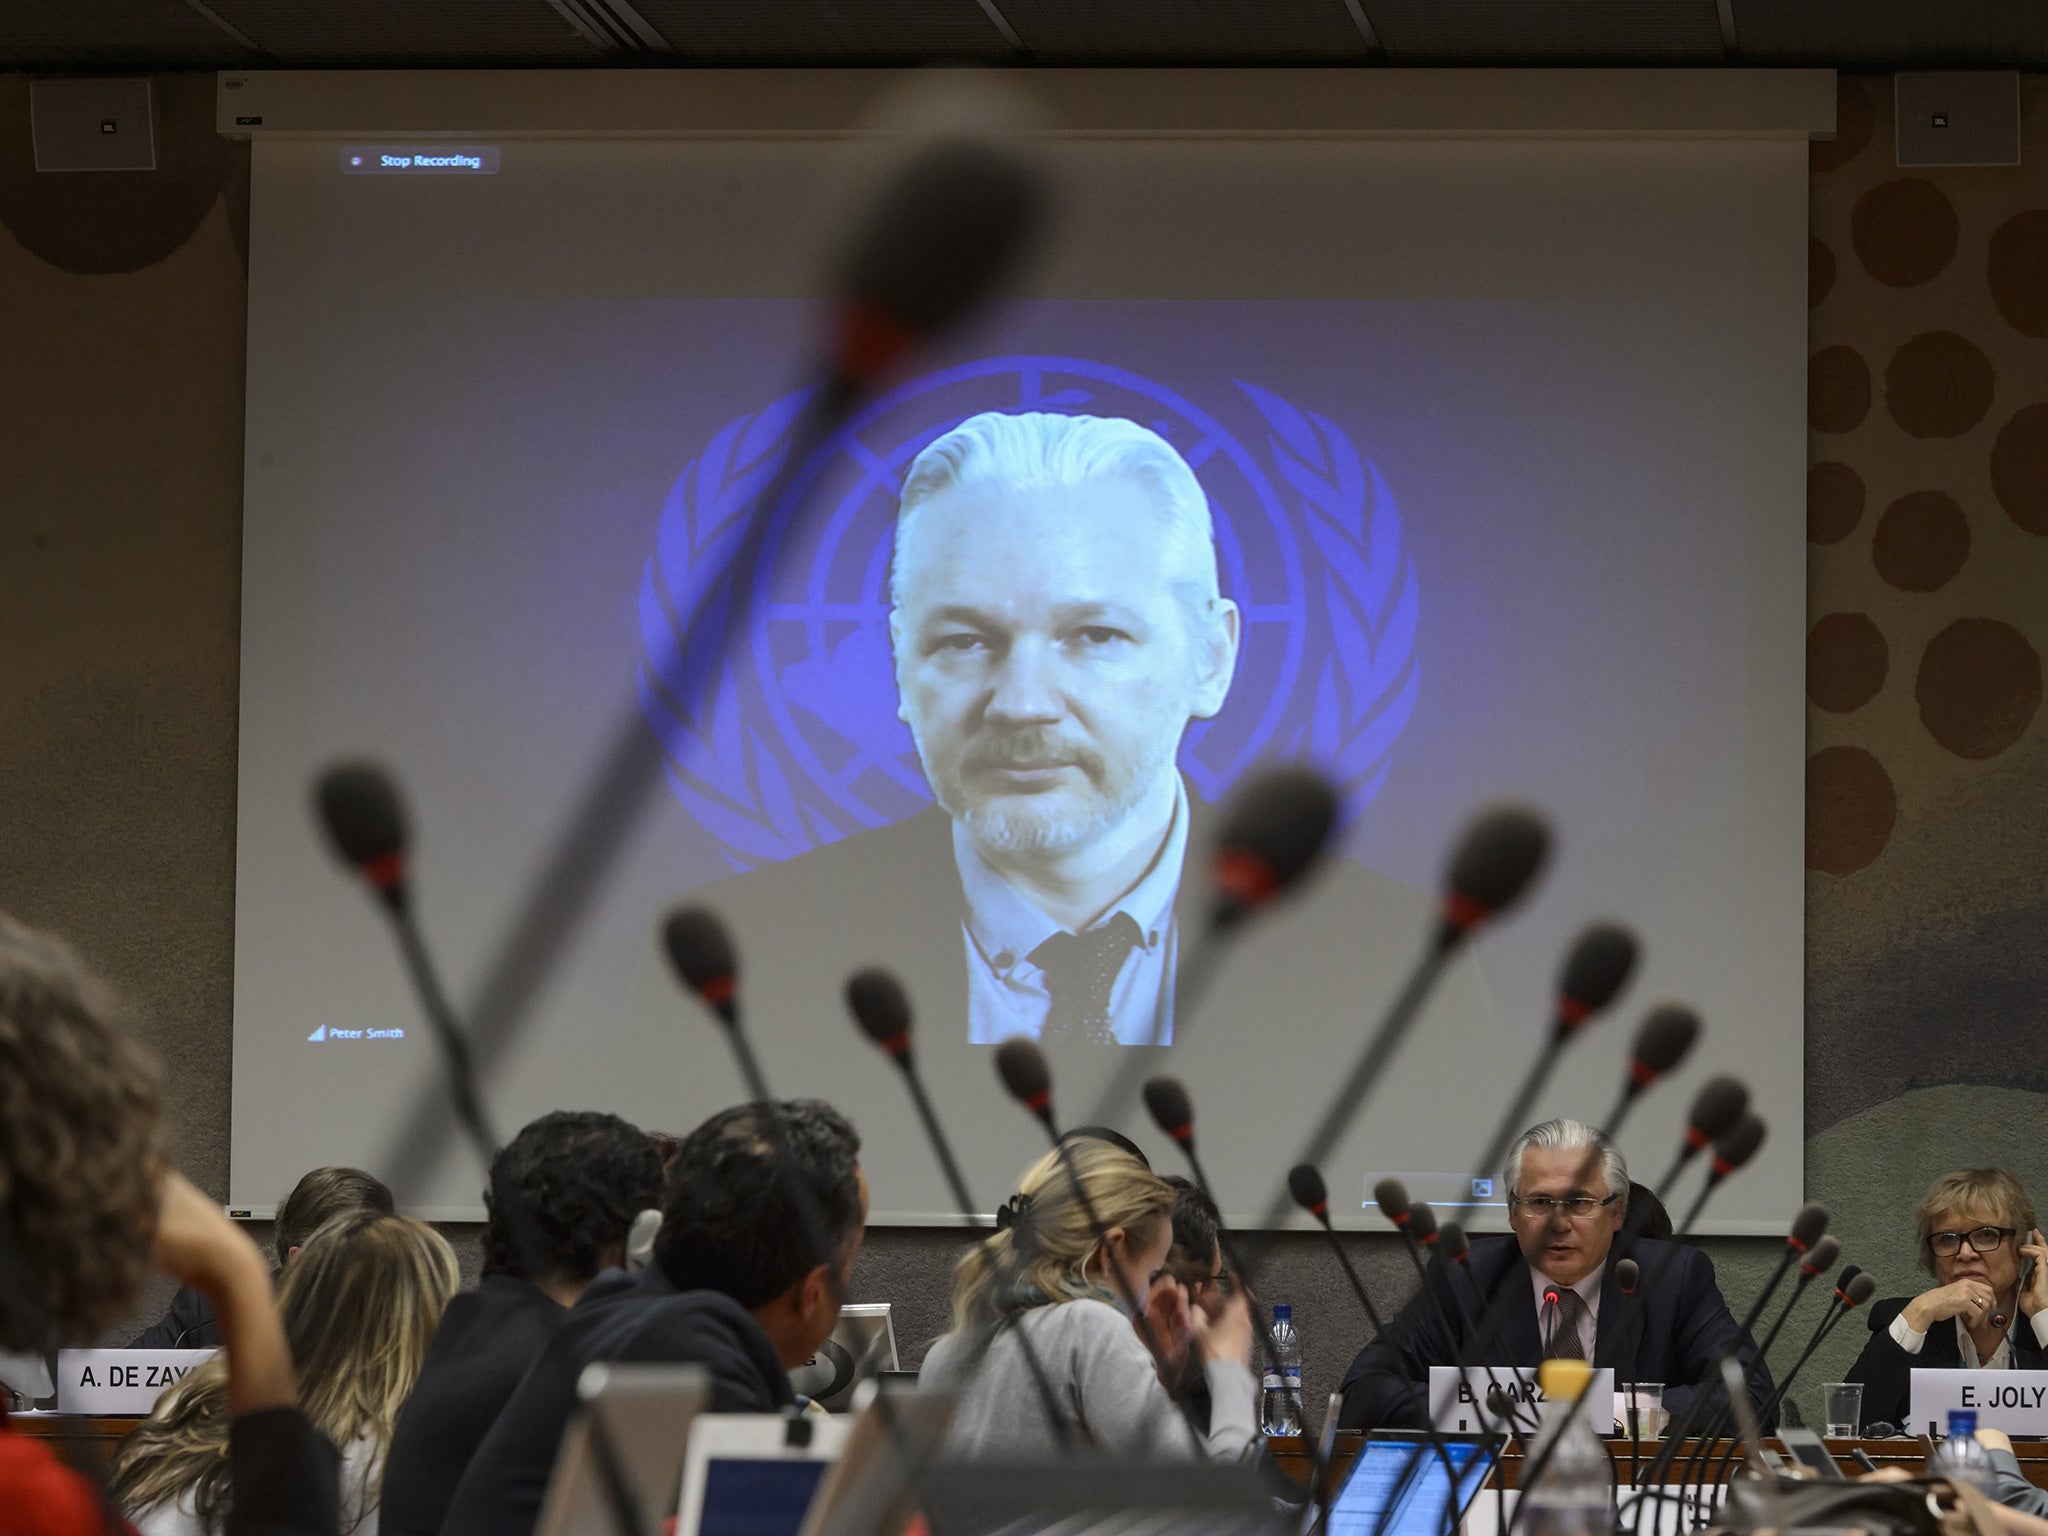 Julian Assange speaking via web cast from the Ecuadorian Embassy during an event on the sideline of the United Nations (UN) Human Rights Council session